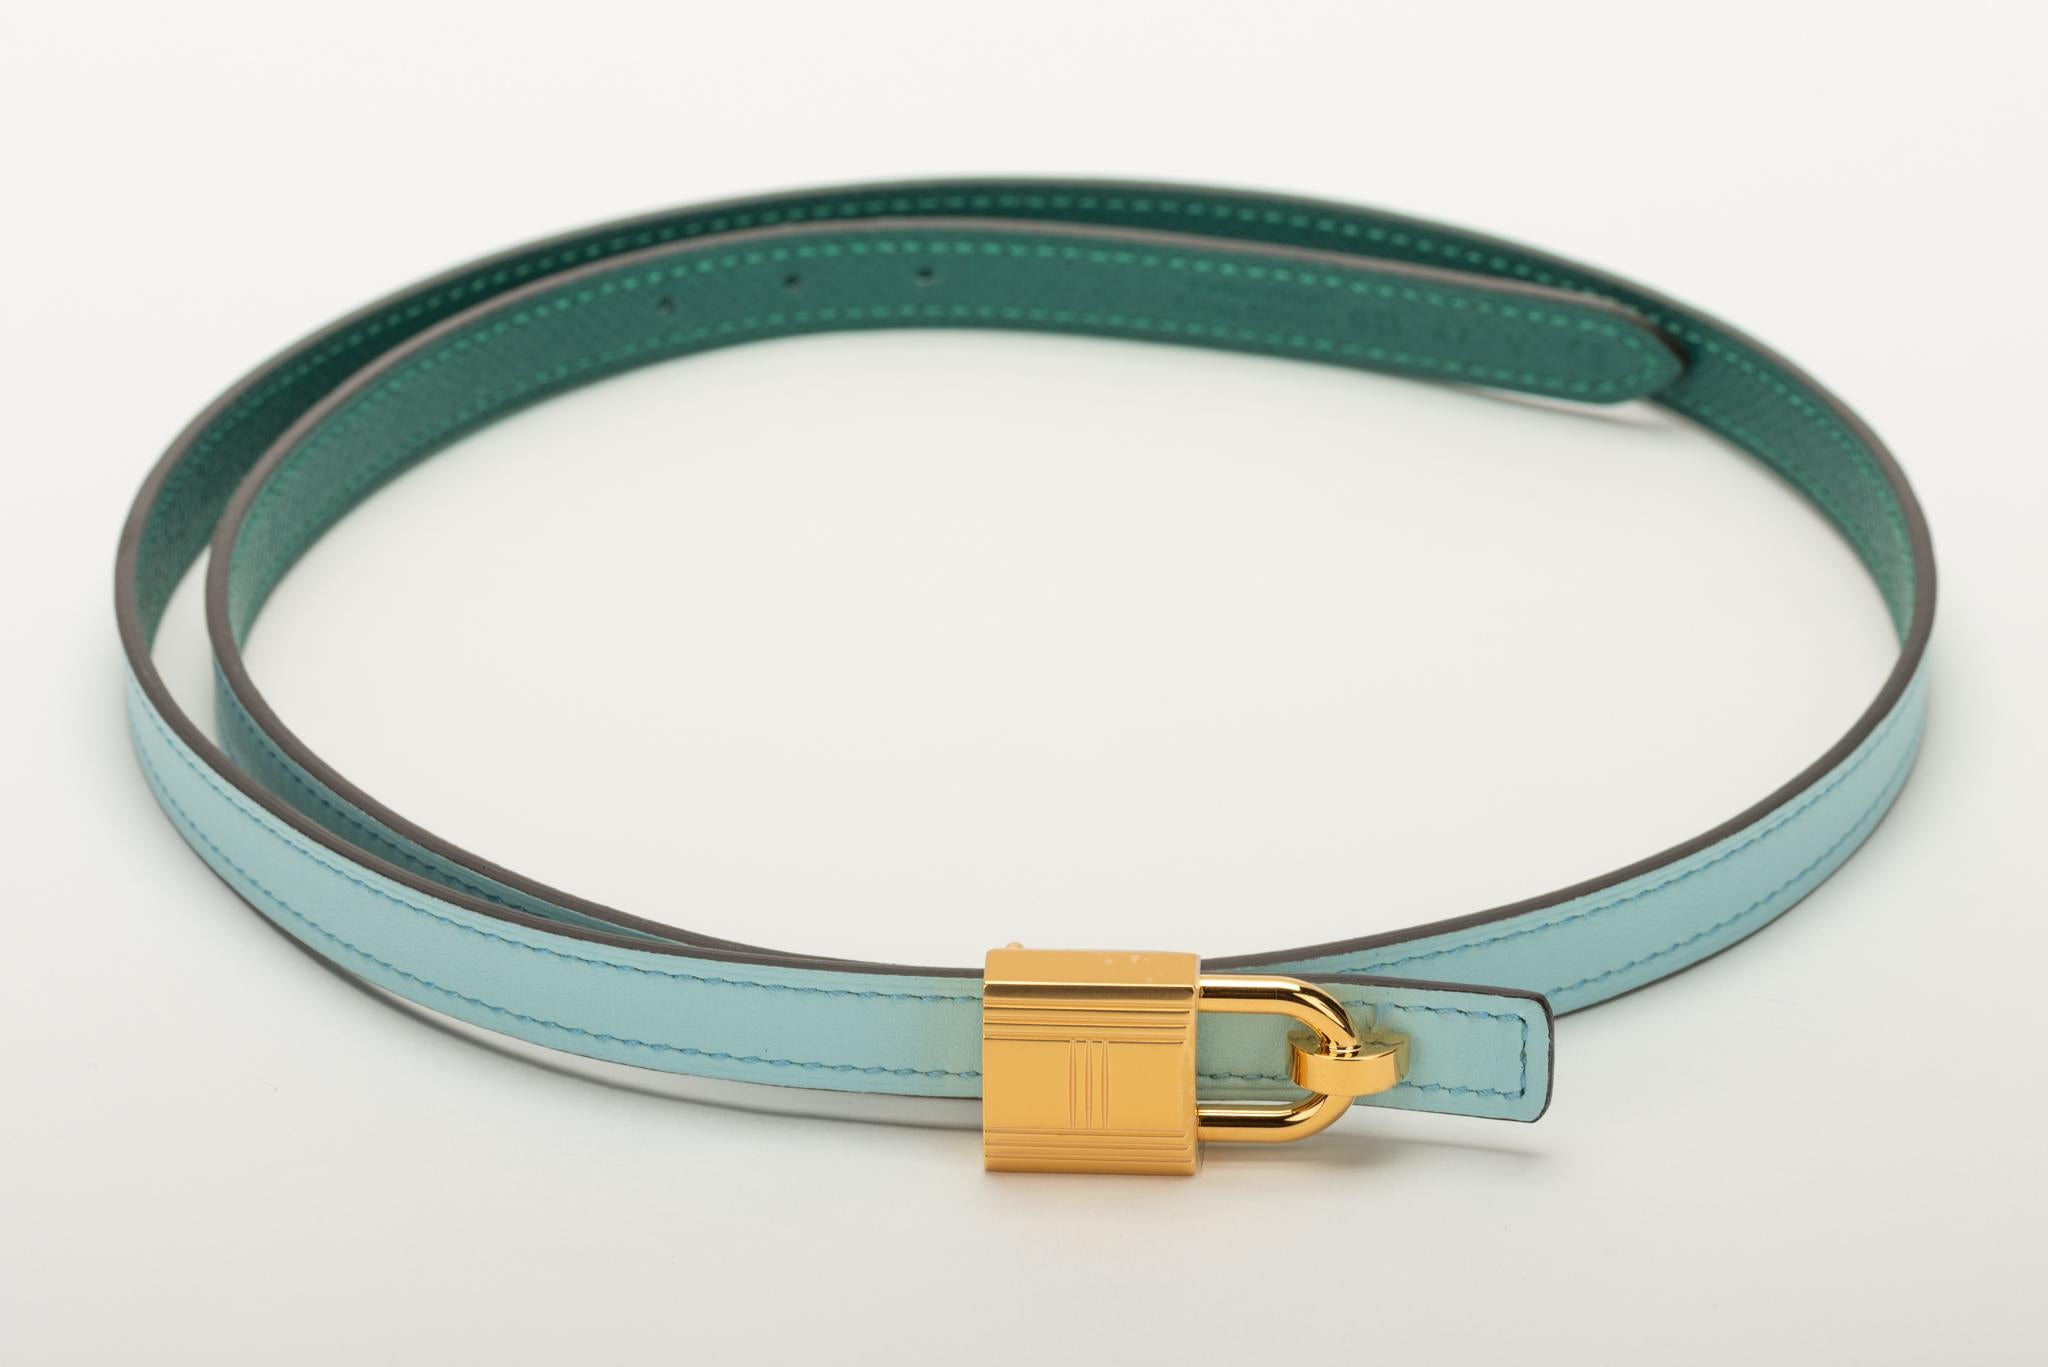 Hermes reversible thin belt in green epsom leather and blue atolle swift. Rose gold tone buckle belt. Size 85 cm, date stamp A for 2017. Comes with original box, dust cover , ribbon and shopping bag.